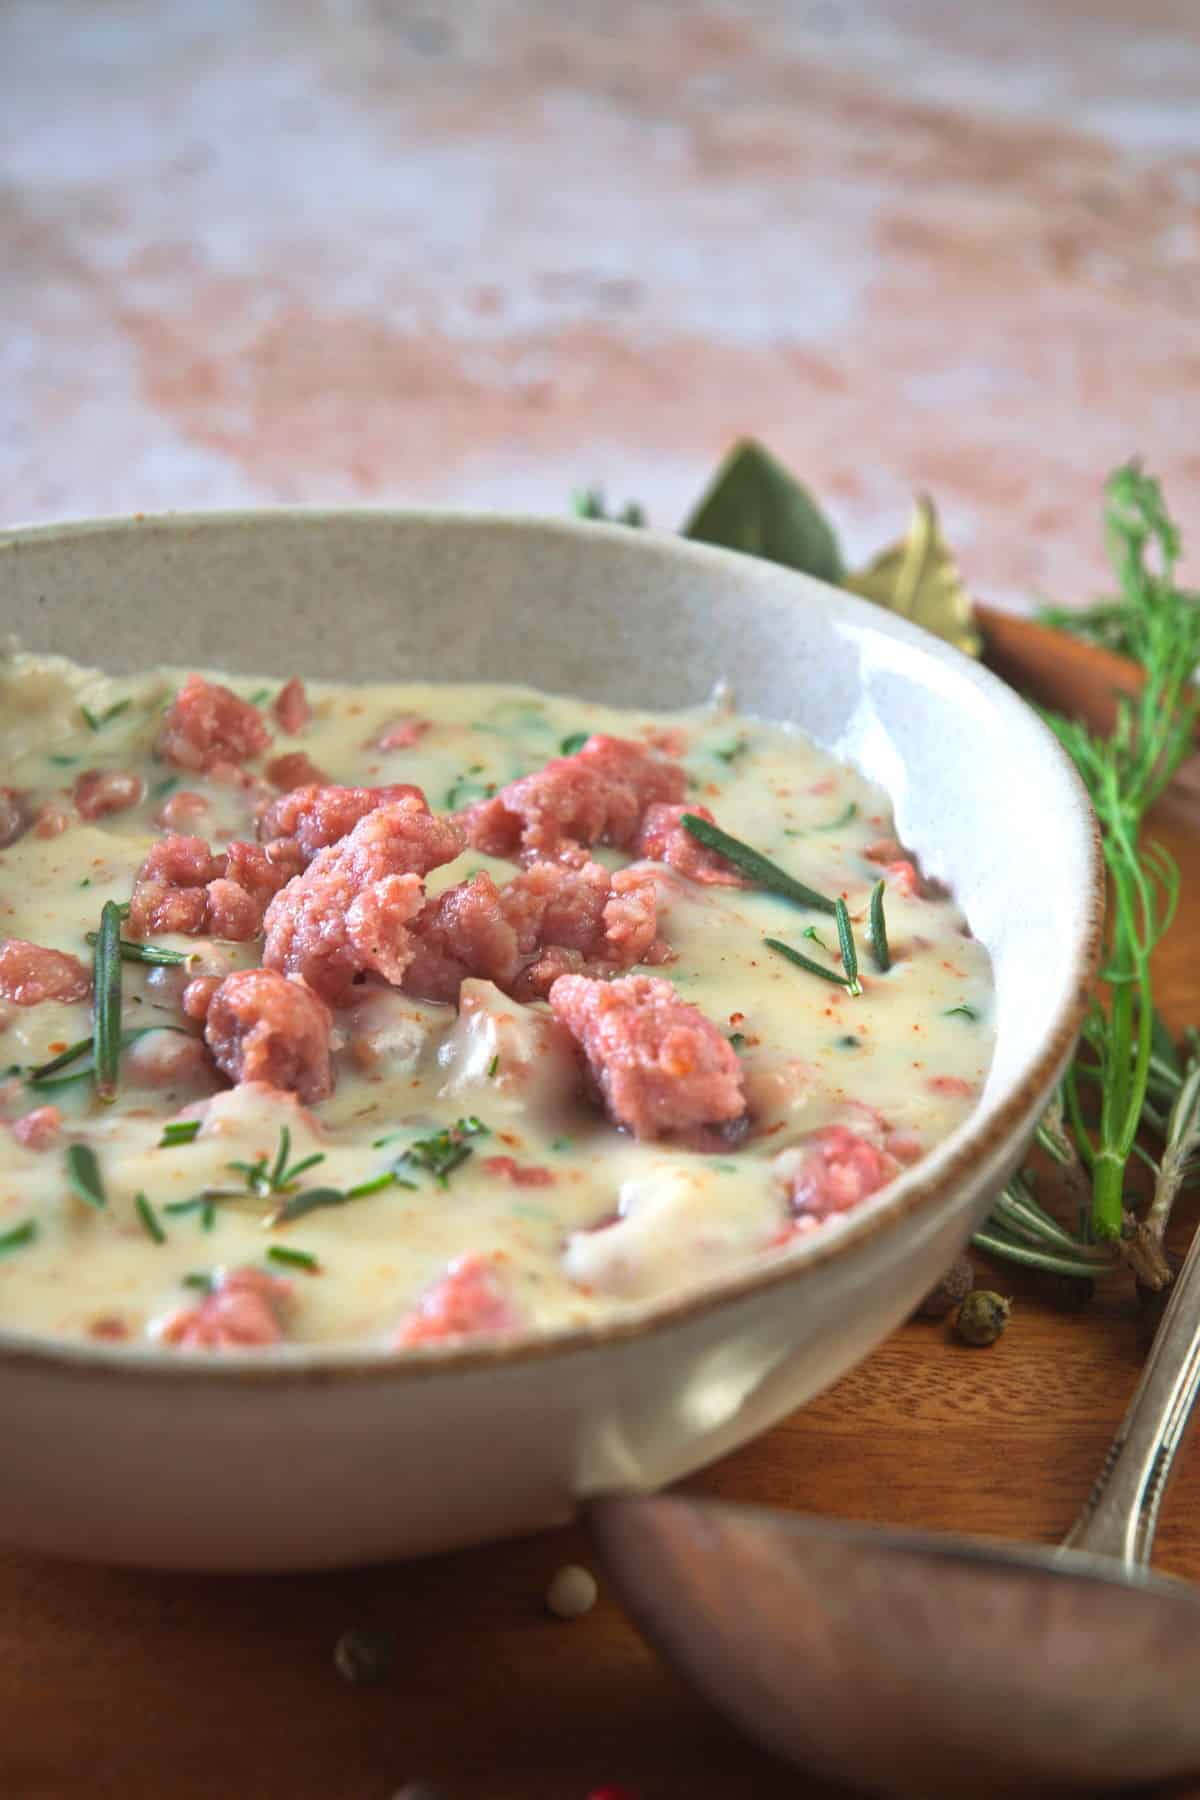 Sawmill gravy with fresh herbs in a white bowl over a wooden plate, a gravy spoon on the side.